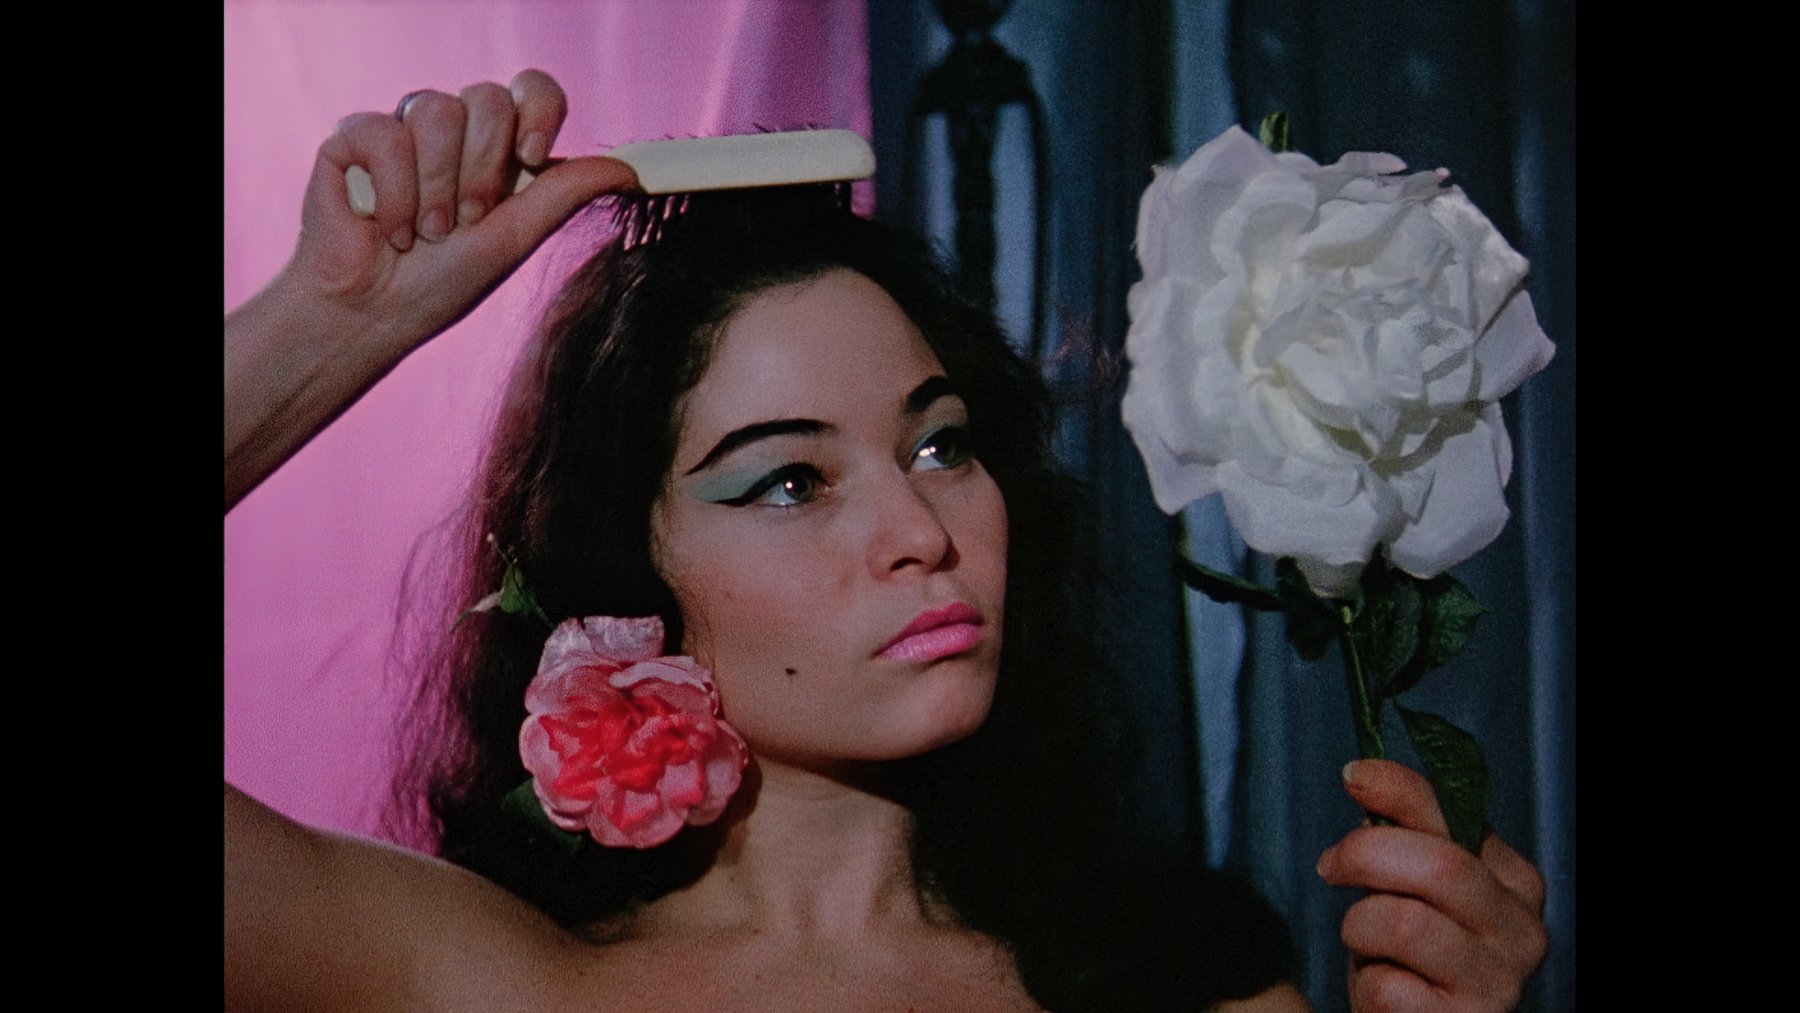 Donna Kerness in Sins of the Fleshapoids (dir. Mike Kuchar, USA, 1965)
Kuchar Brothers Trust 
